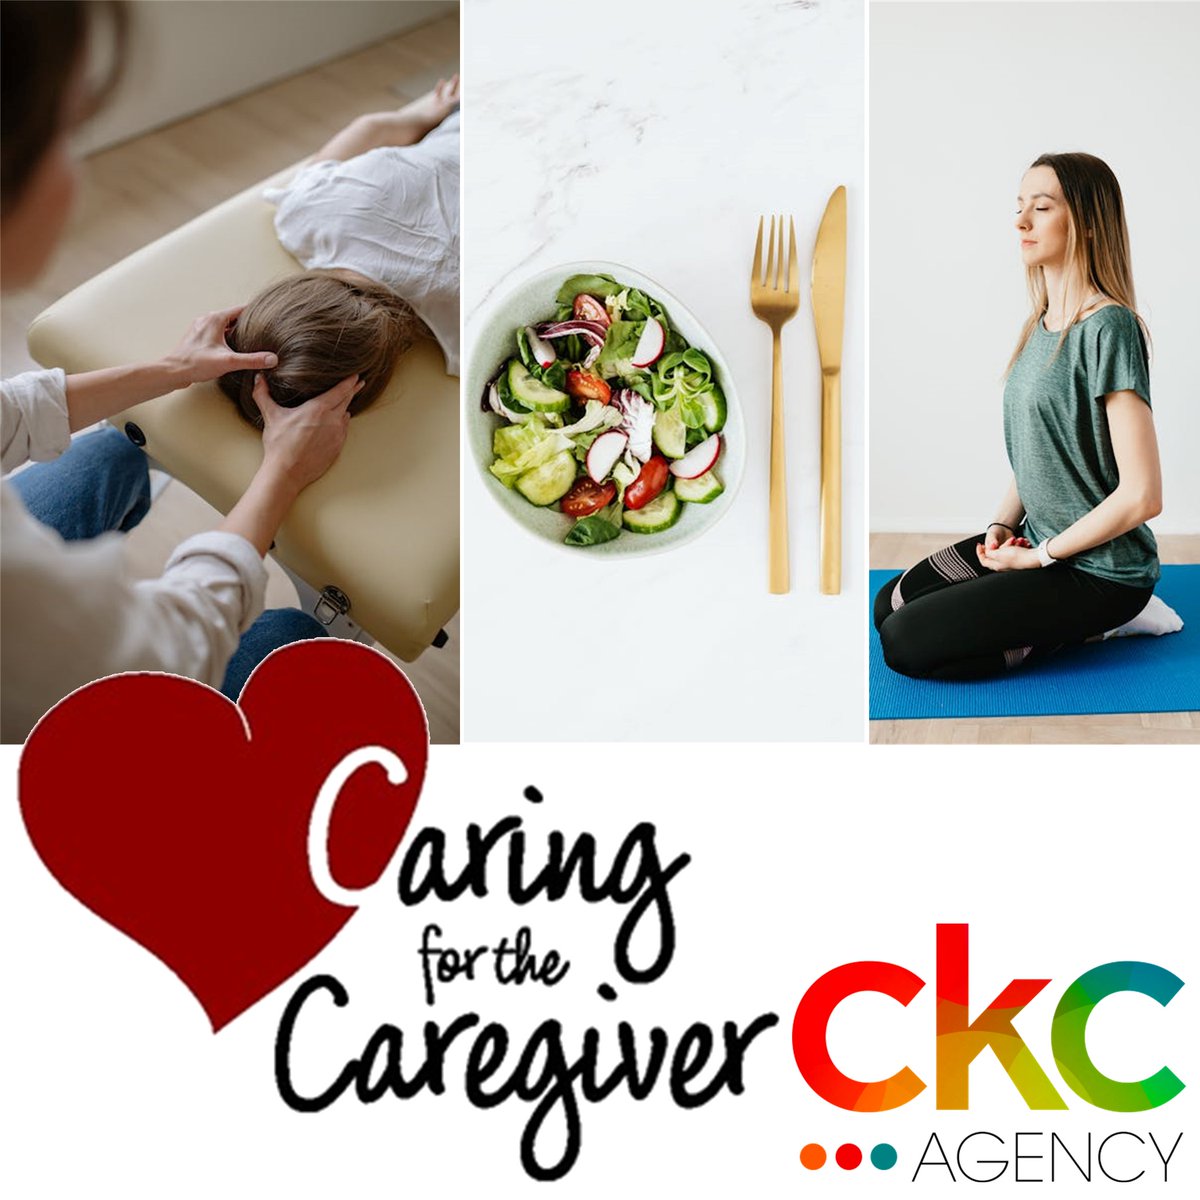 #TuesdayTribute to tireless caregivers. #CKCAgency clients @geshermi and Jewish Senior Life’s Brown Center are hosting a free Caregiver’s Day Off event April 7. thejewishnews.com/community/free… #PR #publicity @JewishNewsDet